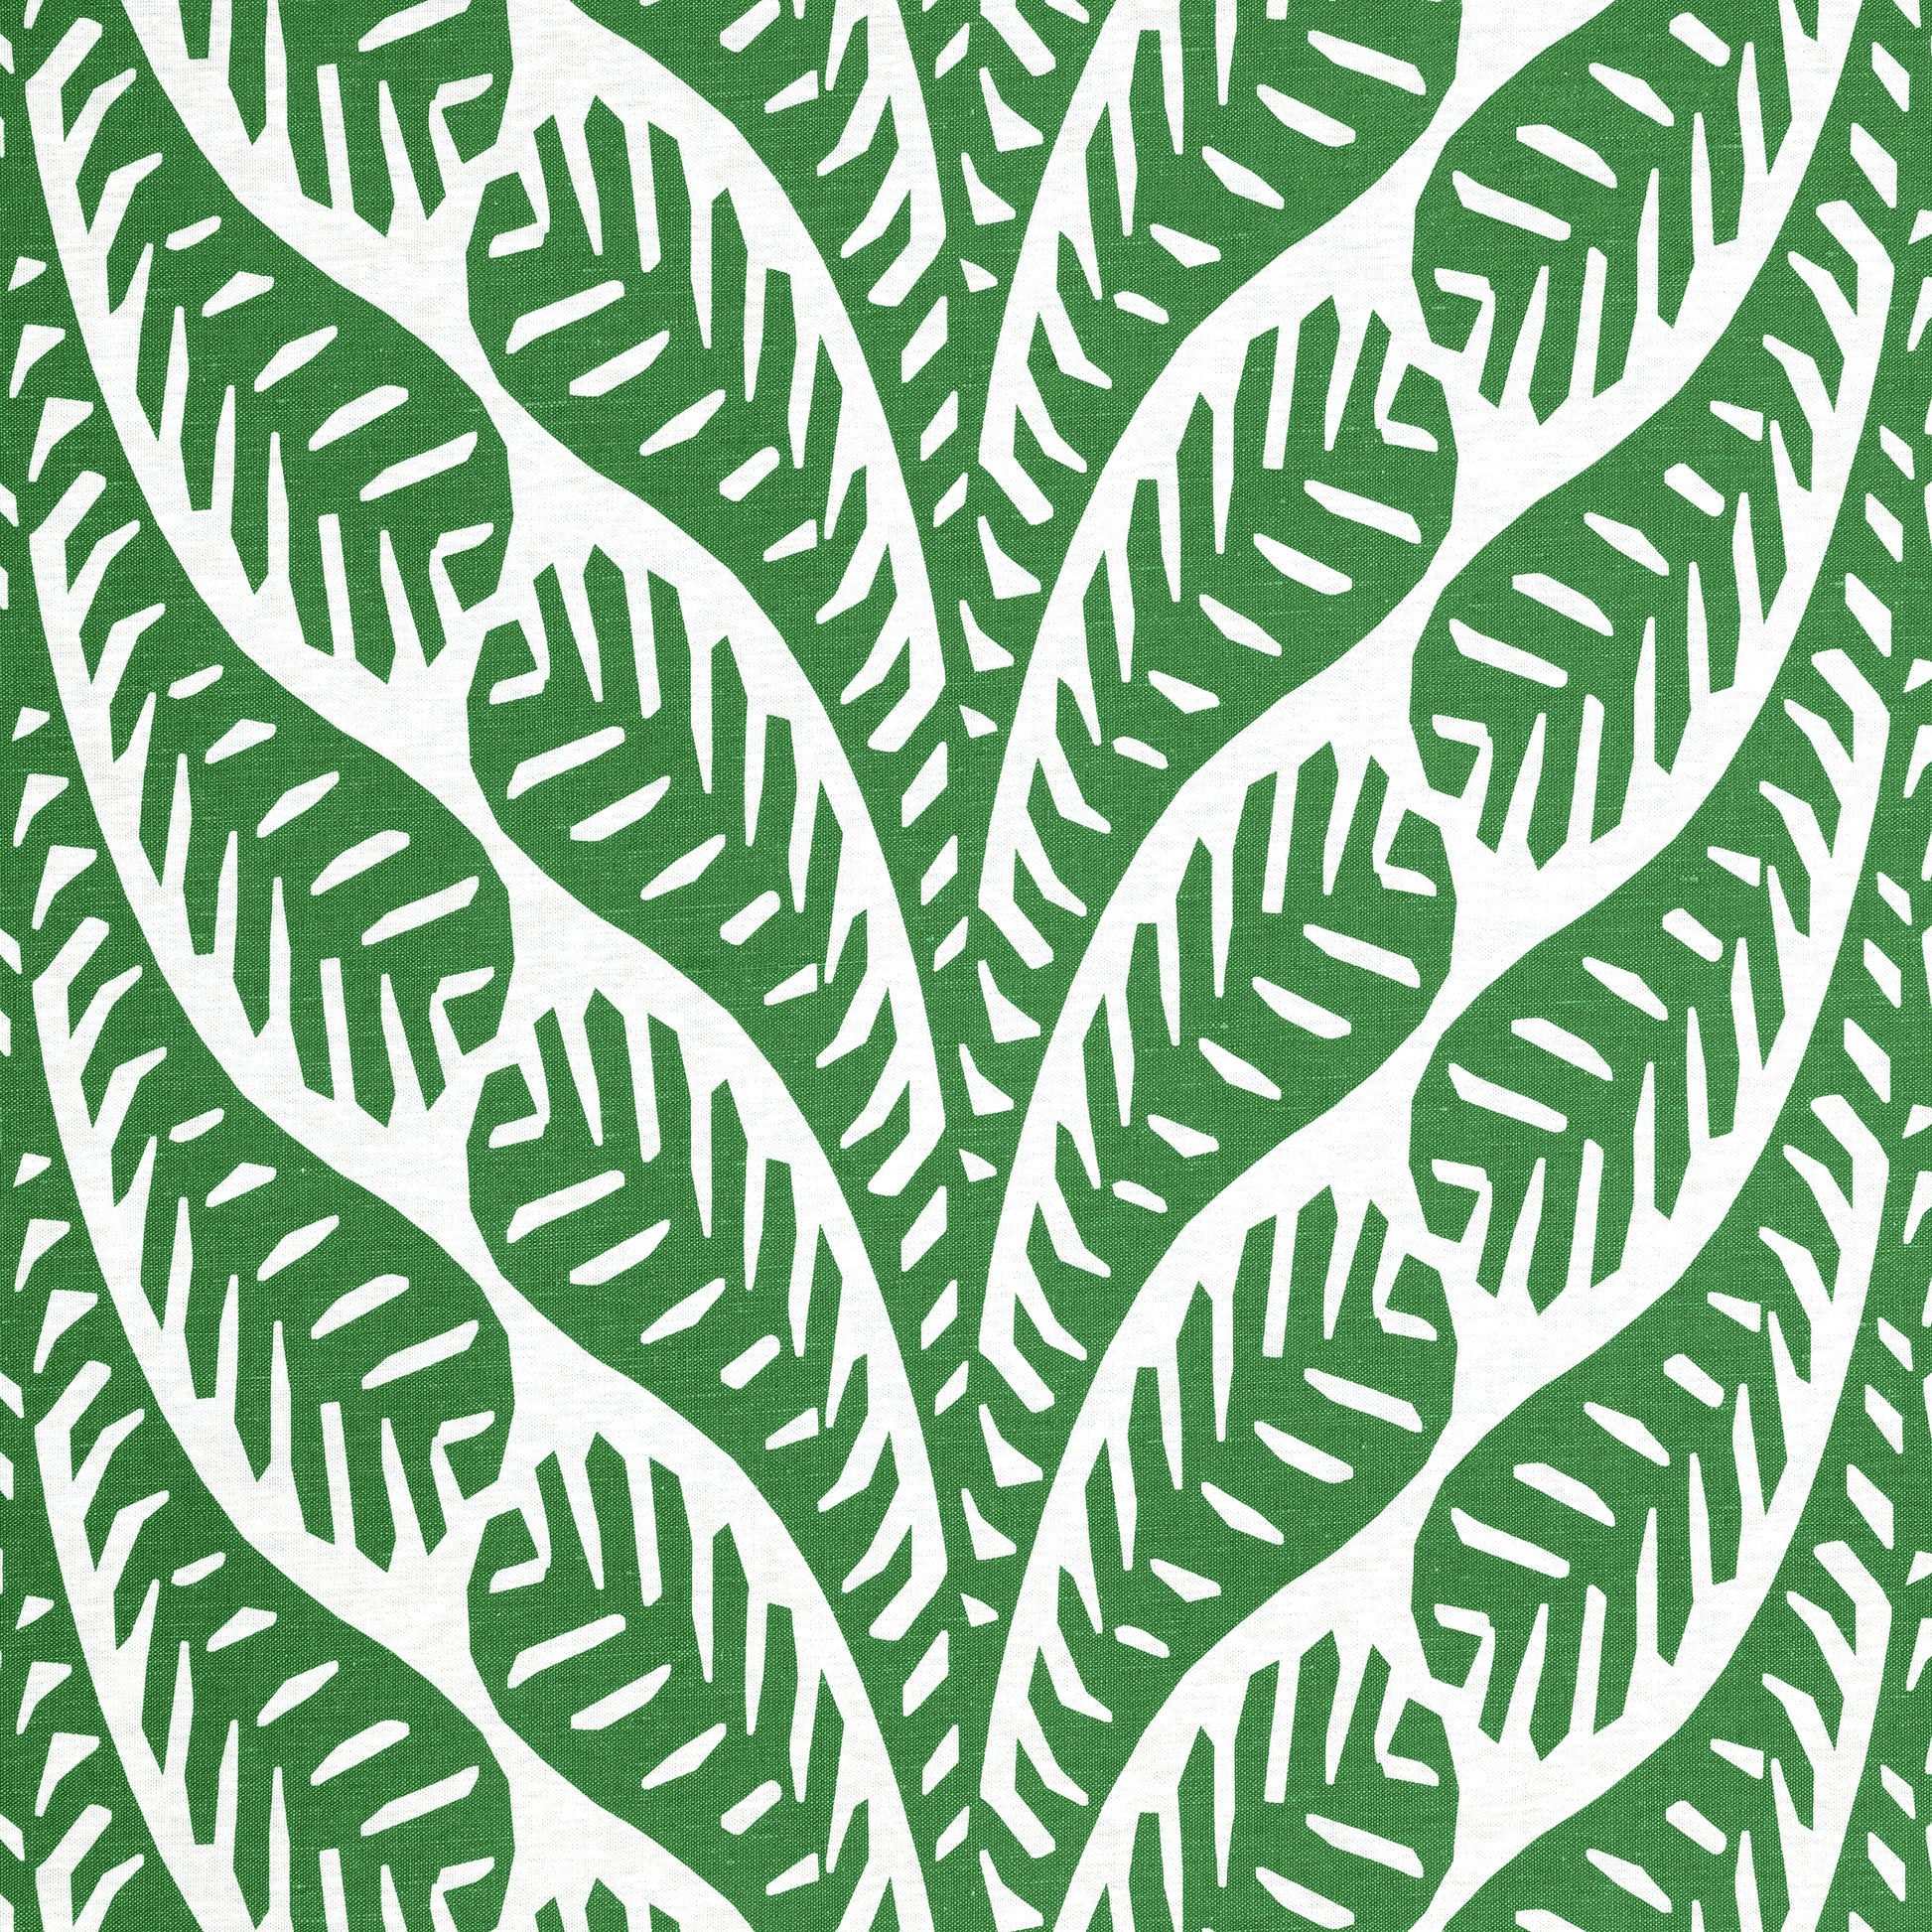 Purchase Thibaut Fabric Product F920832 pattern name Ginger color Green